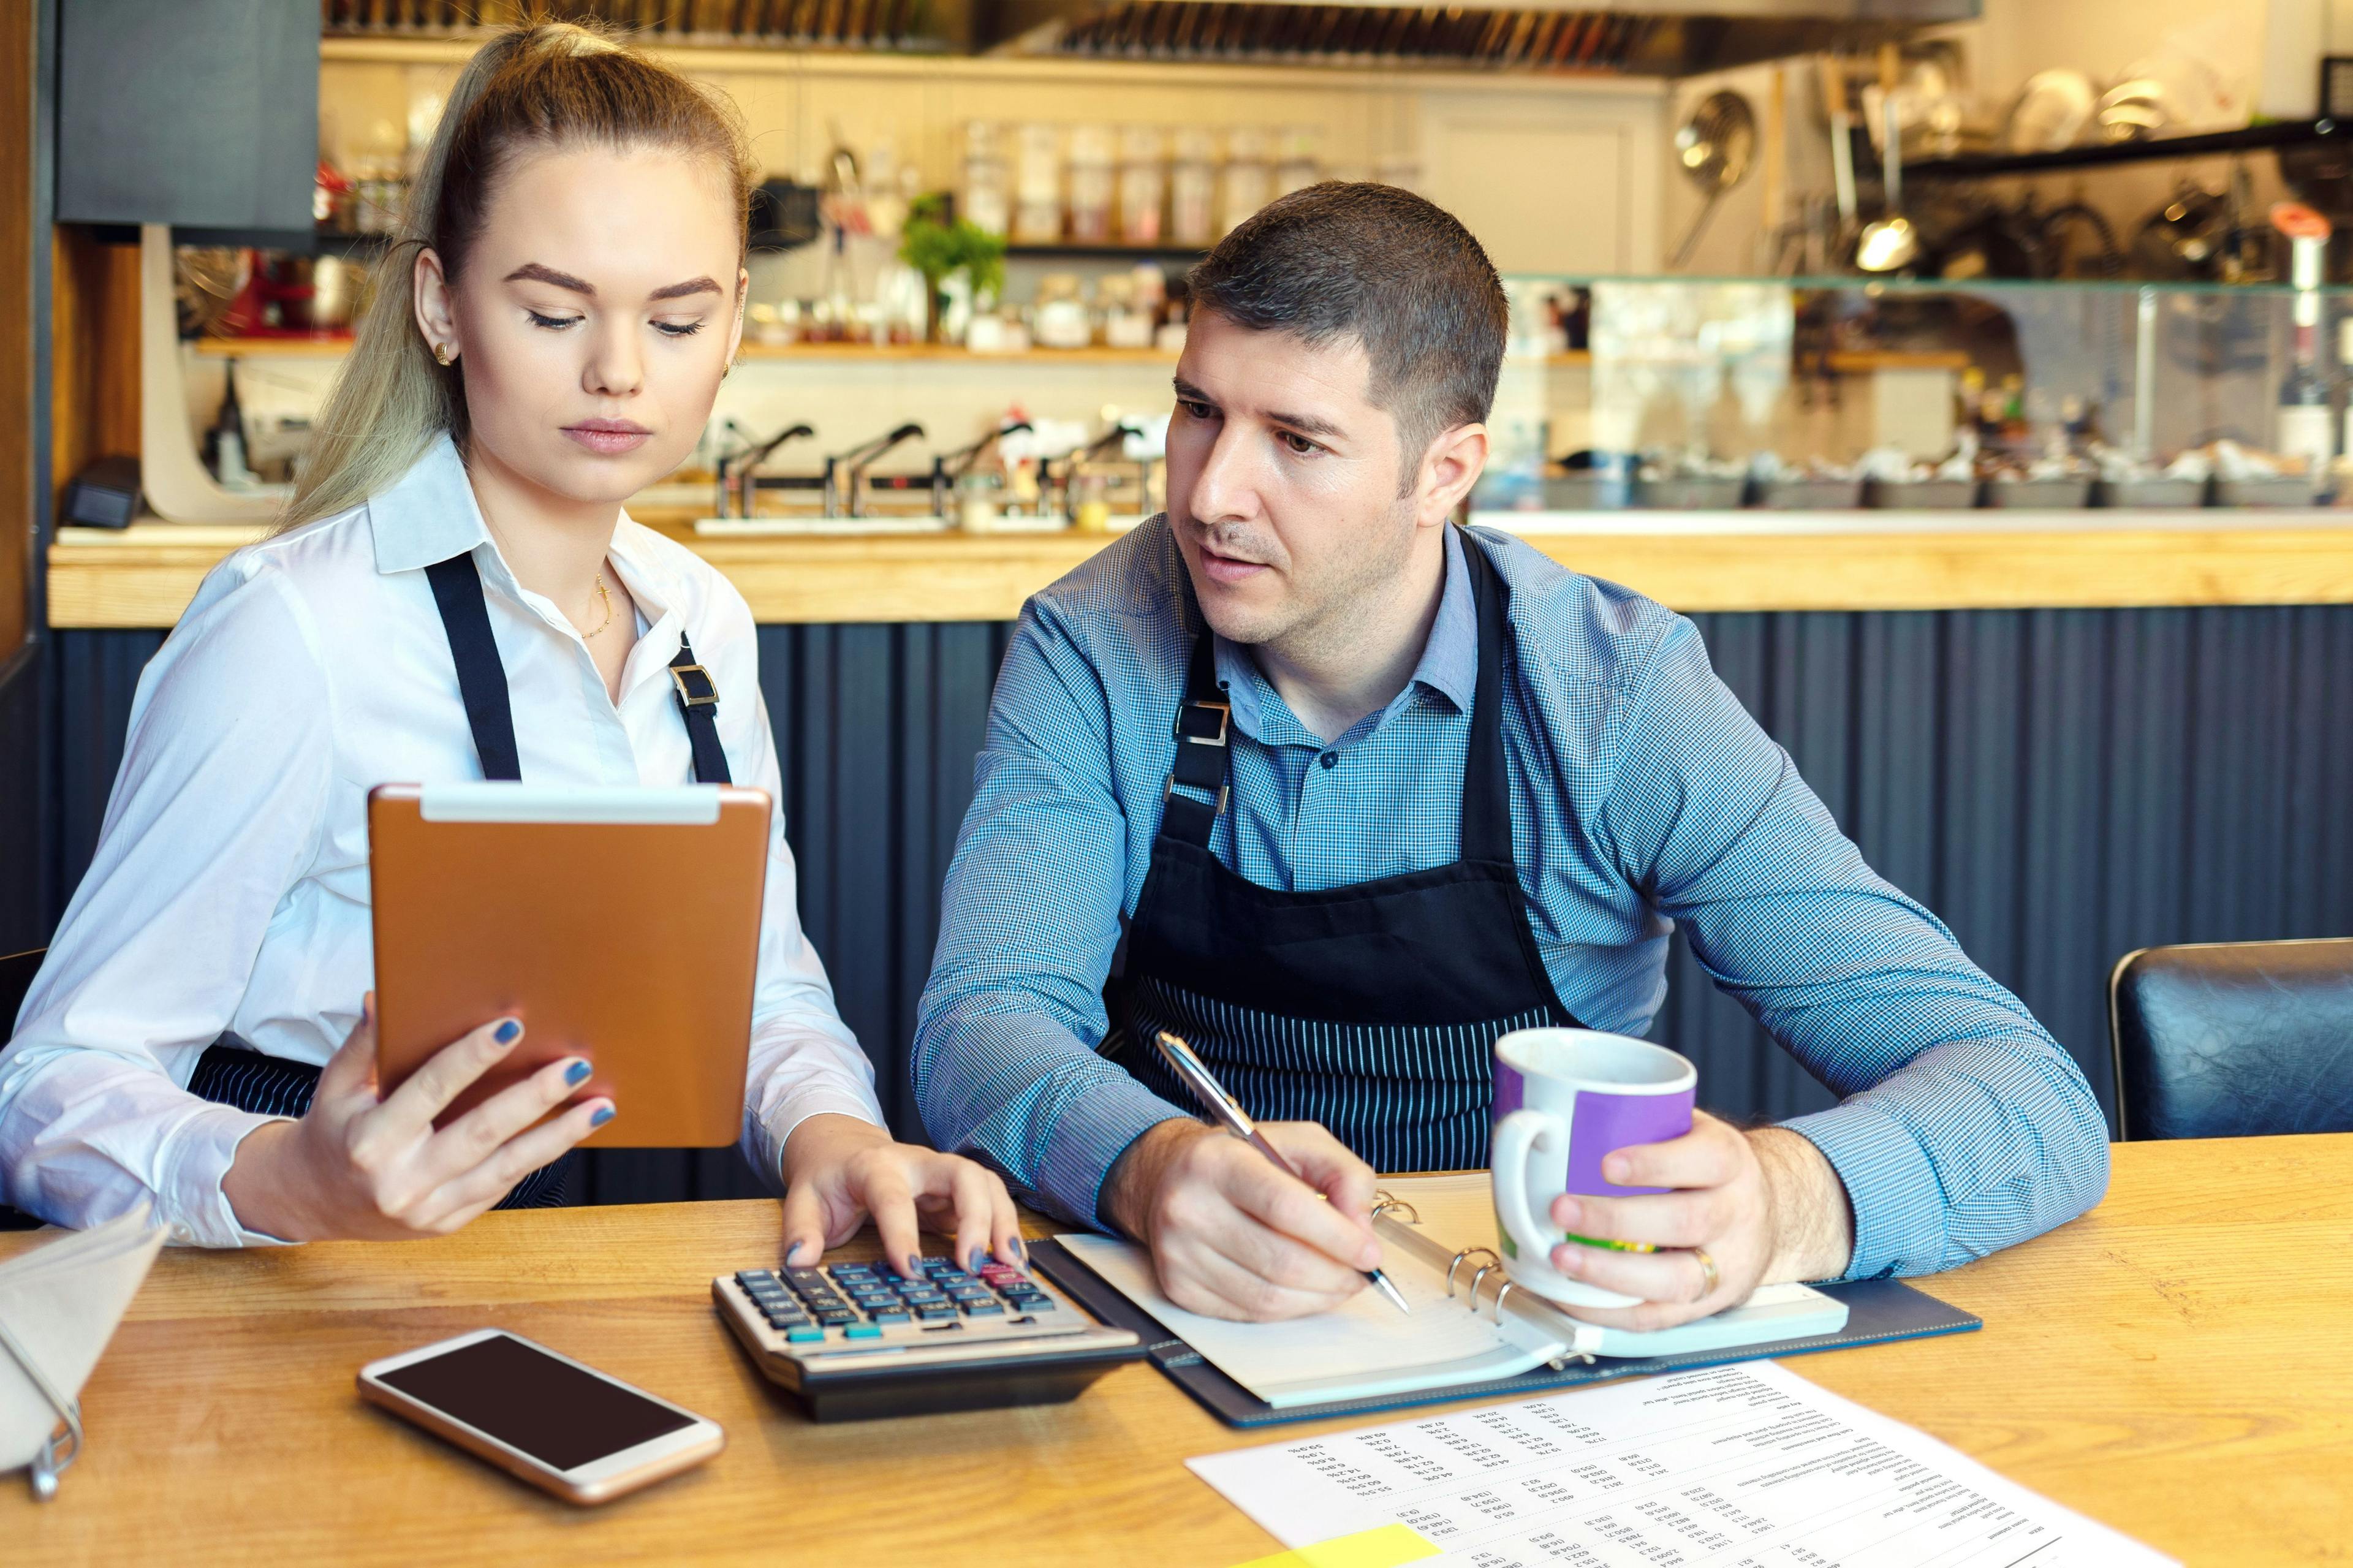 Man and woman using calculator for restaurant revenue management.